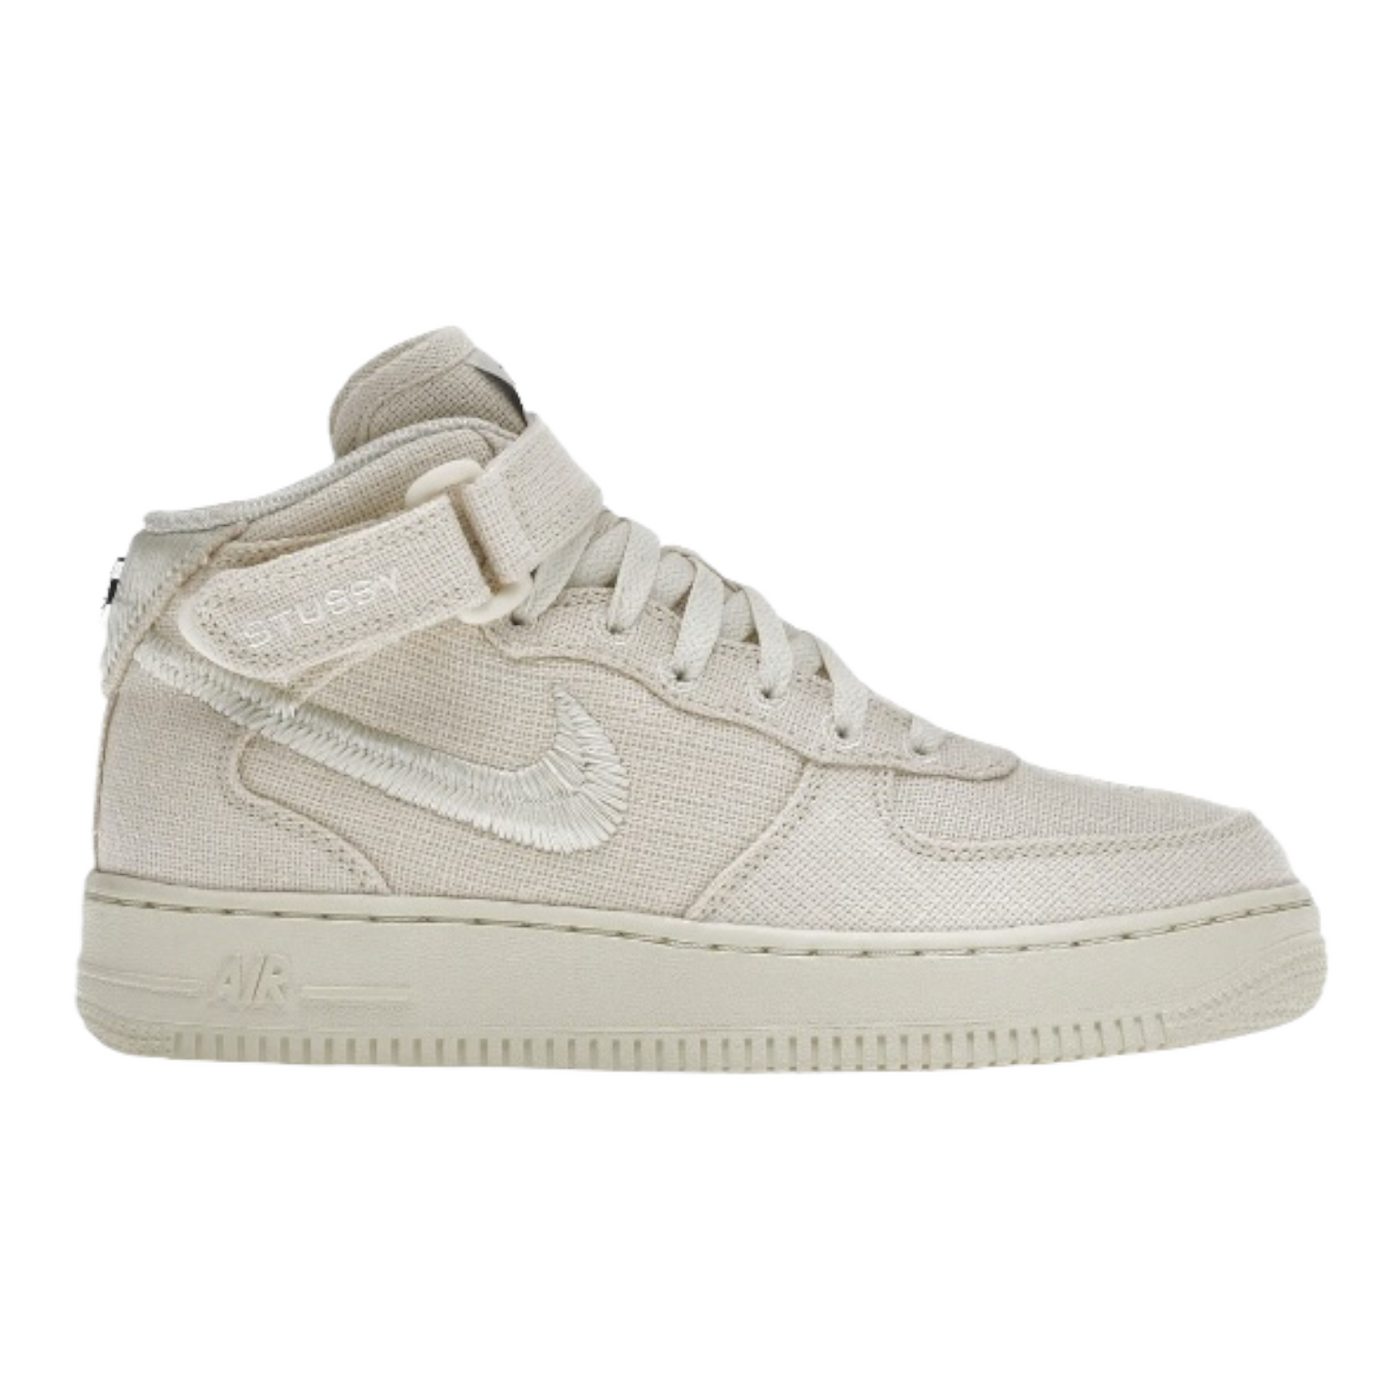 NIKE AIR FORCE 1 MID STUSSY FOSSIL